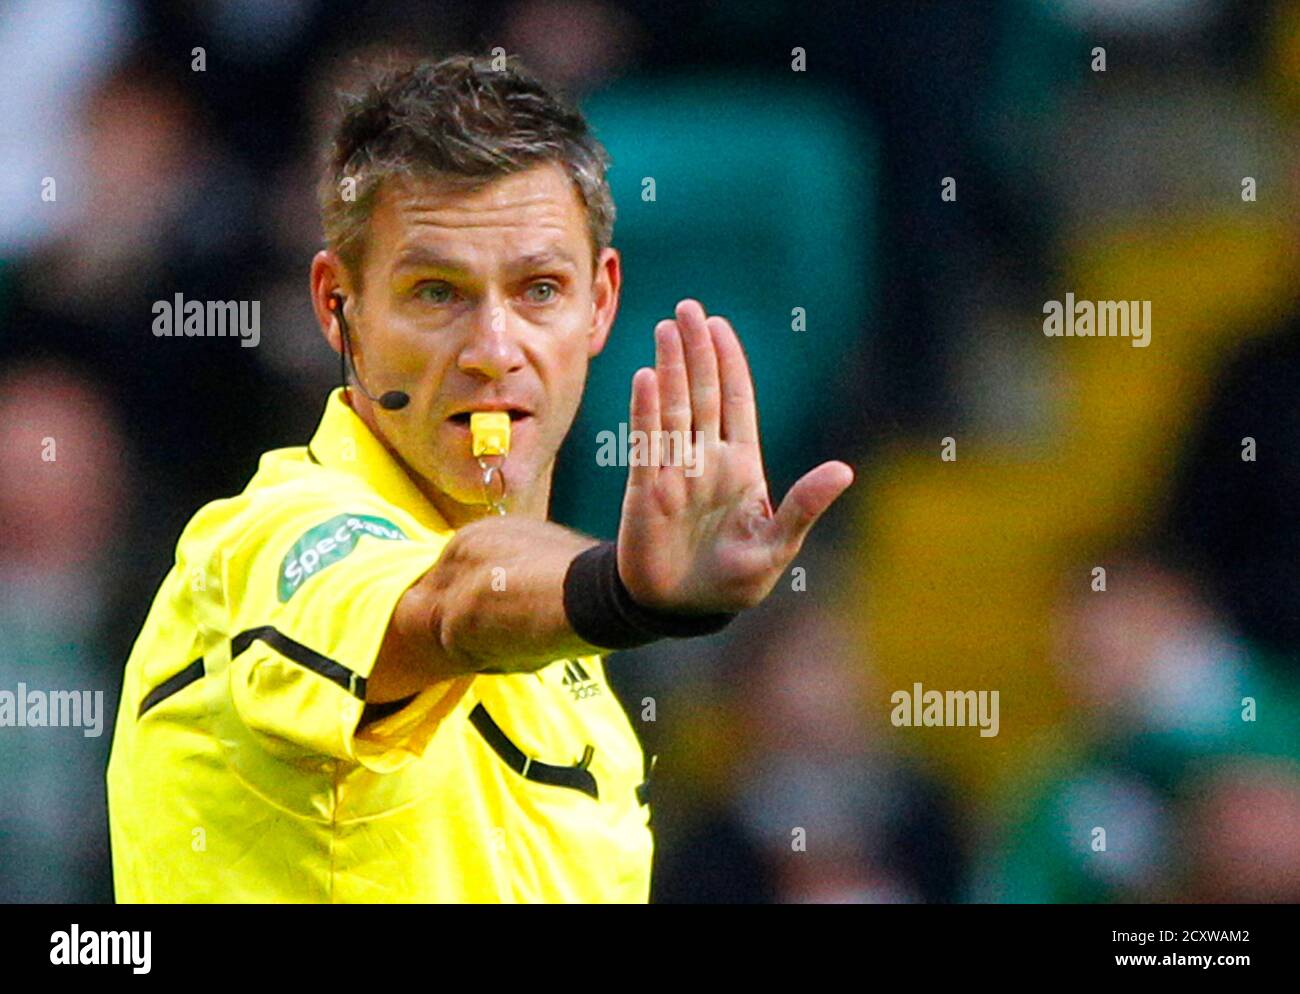 Referee Alain Hamer from Luxembourg gestures during the Scottish Premier  League soccer match between Celtic and Inverness Caley Thistle in Glasgow,  Scotland November 27, 2010. For the first time in Scotland match